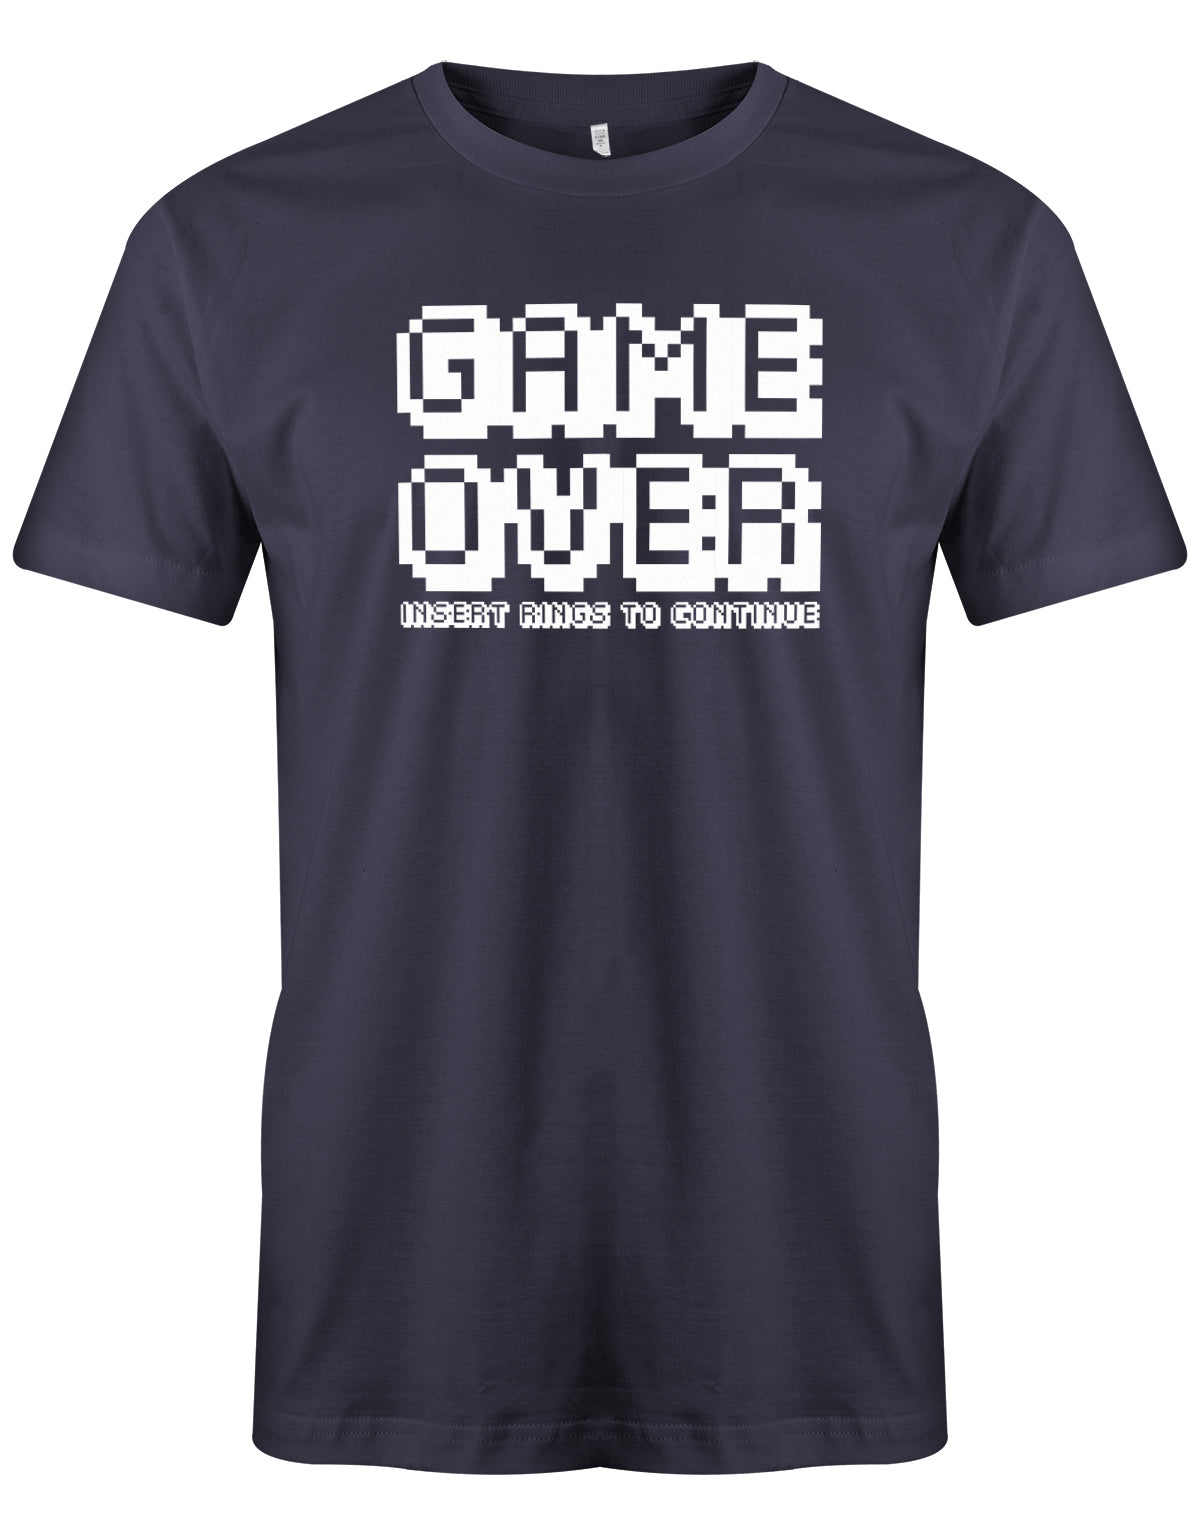 JGA Shirt Männer - Game Over insert rings to continue